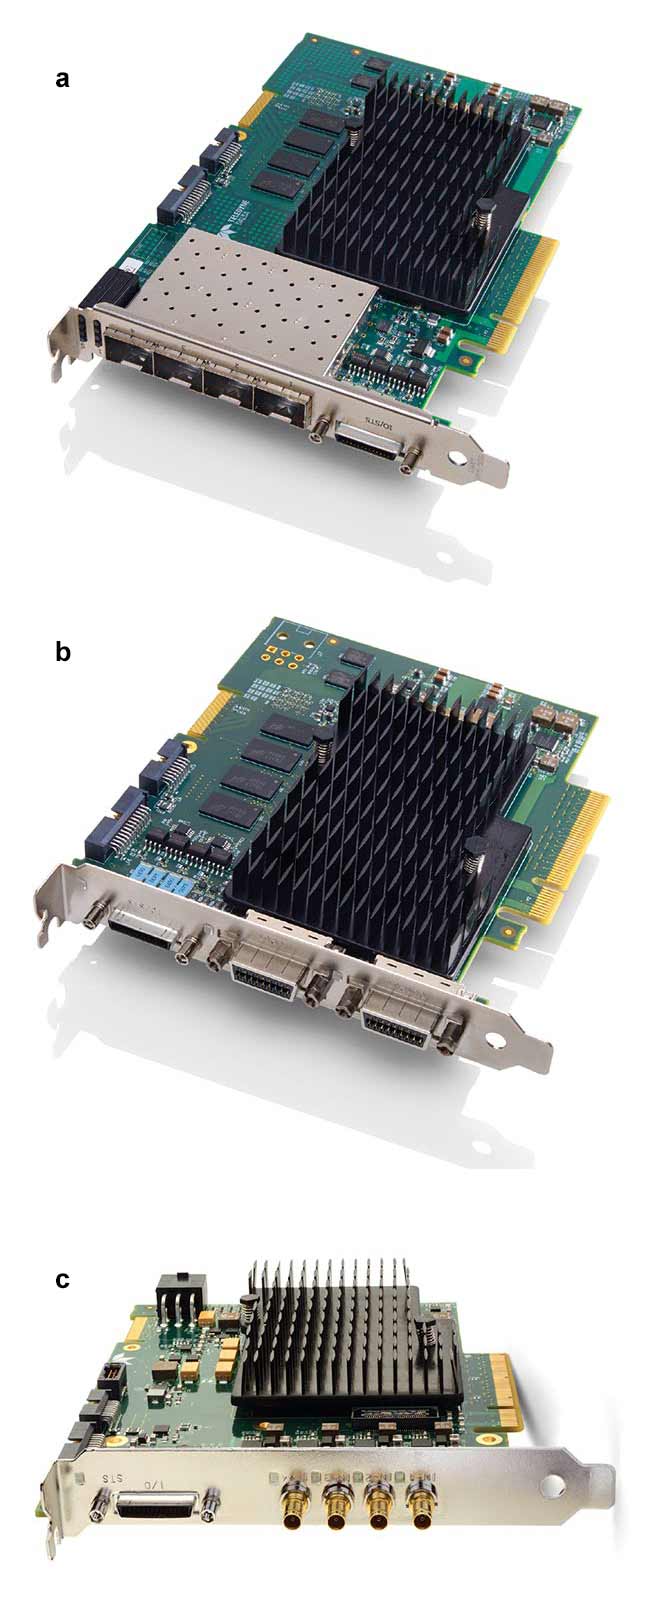 Figure 1. High-speed frame grabbers are available for CLHS, supporting two levels of throughput with plug-in fiber cables (a, b), and for CXP over coaxial cable (c). Courtesy of Teledyne DALSA.